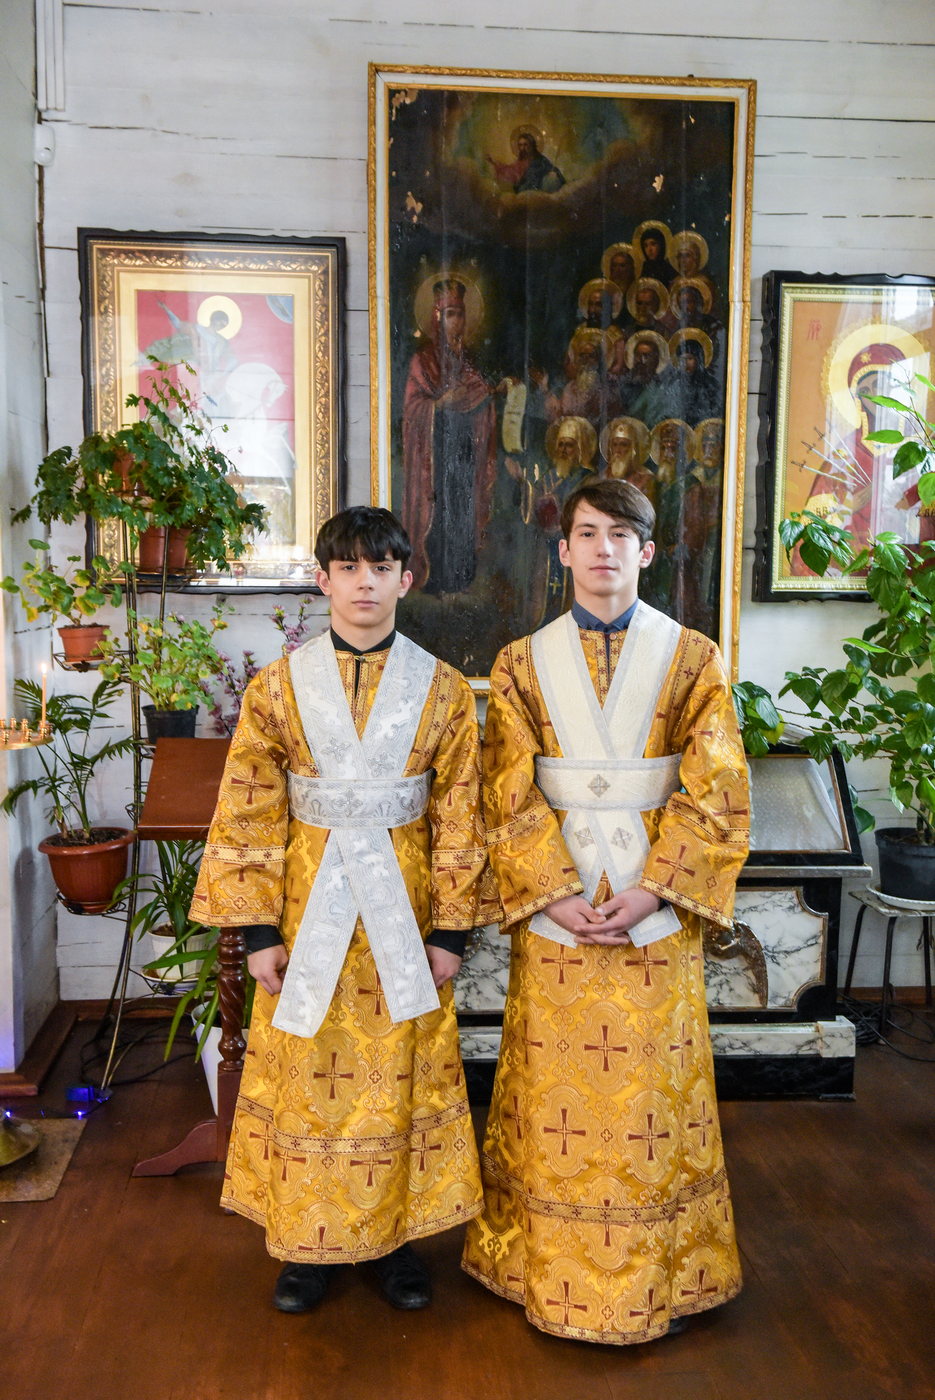 feast of the baptism of the lord at zhulyany 0209